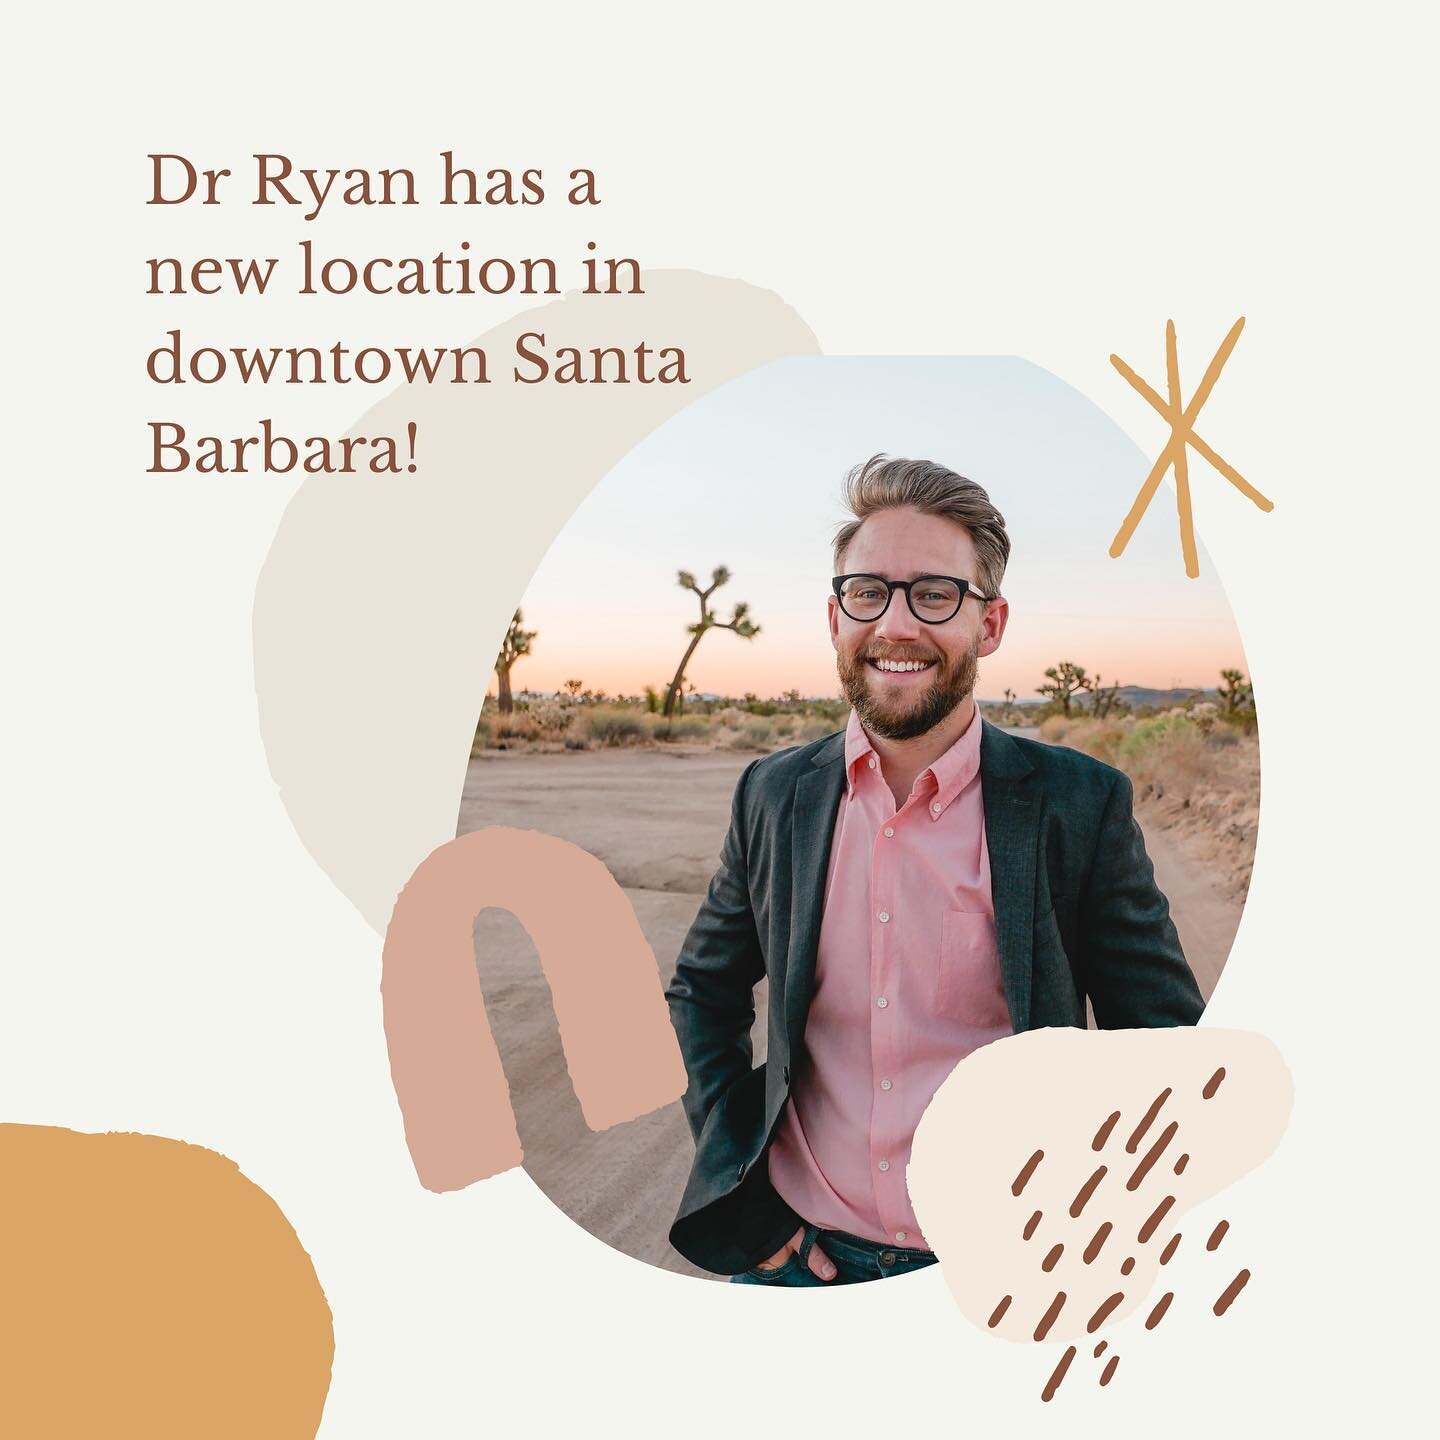 I&rsquo;ve got some big/exciting news! I&rsquo;ve open my own chiropractic office here in the heart of Santa Barbara. Doctor Ryan Chiropractic is open and ready to continue the high level of care that you have come to expect. Looking forward to seein